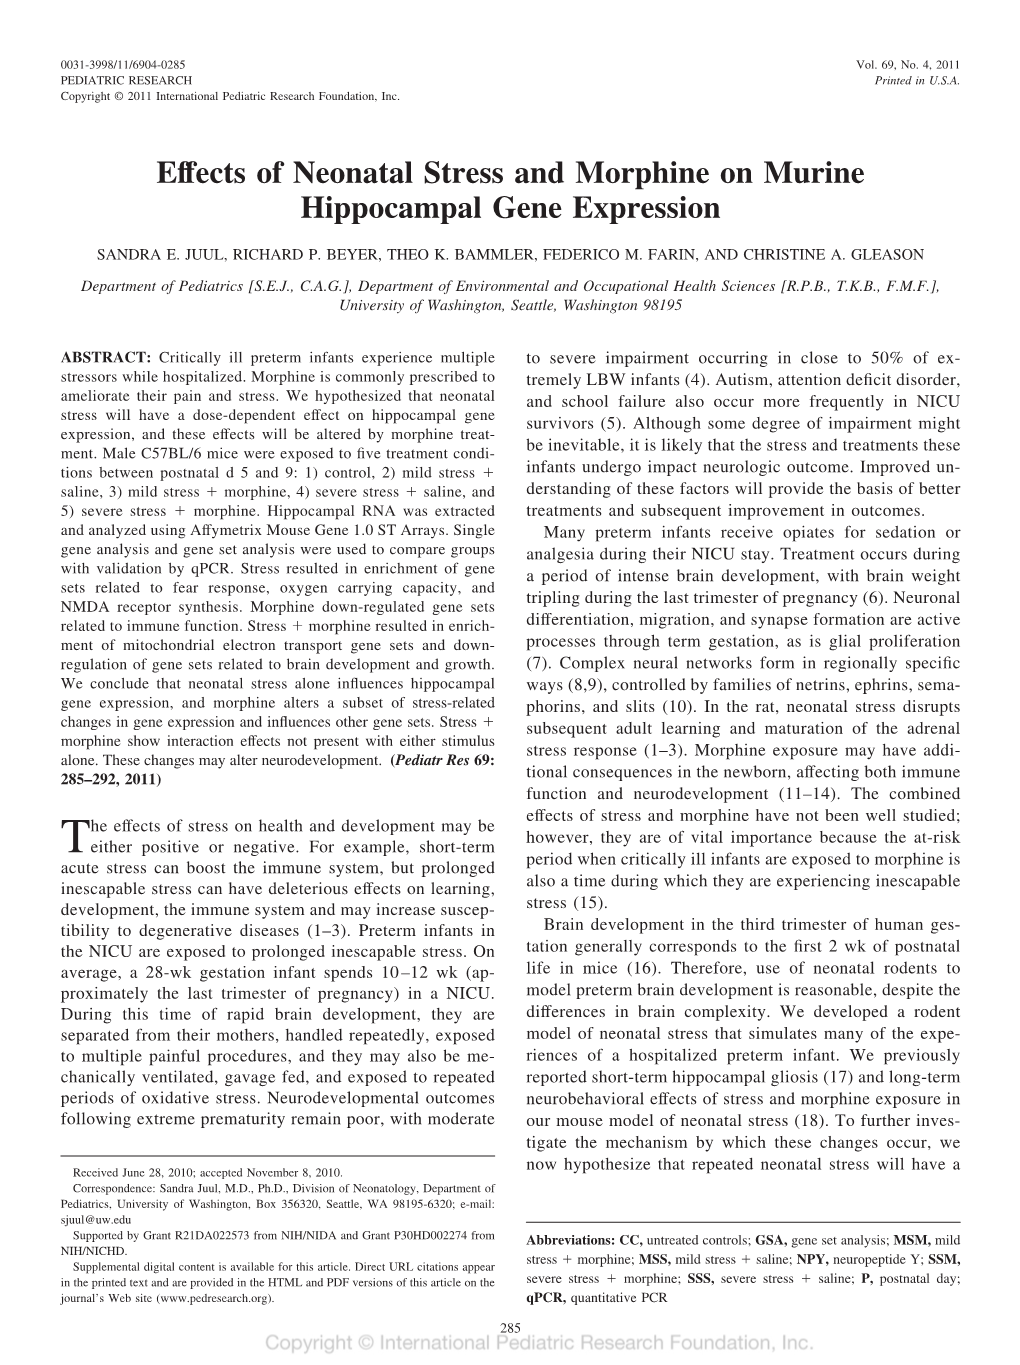 Effects of Neonatal Stress and Morphine on Murine Hippocampal Gene Expression